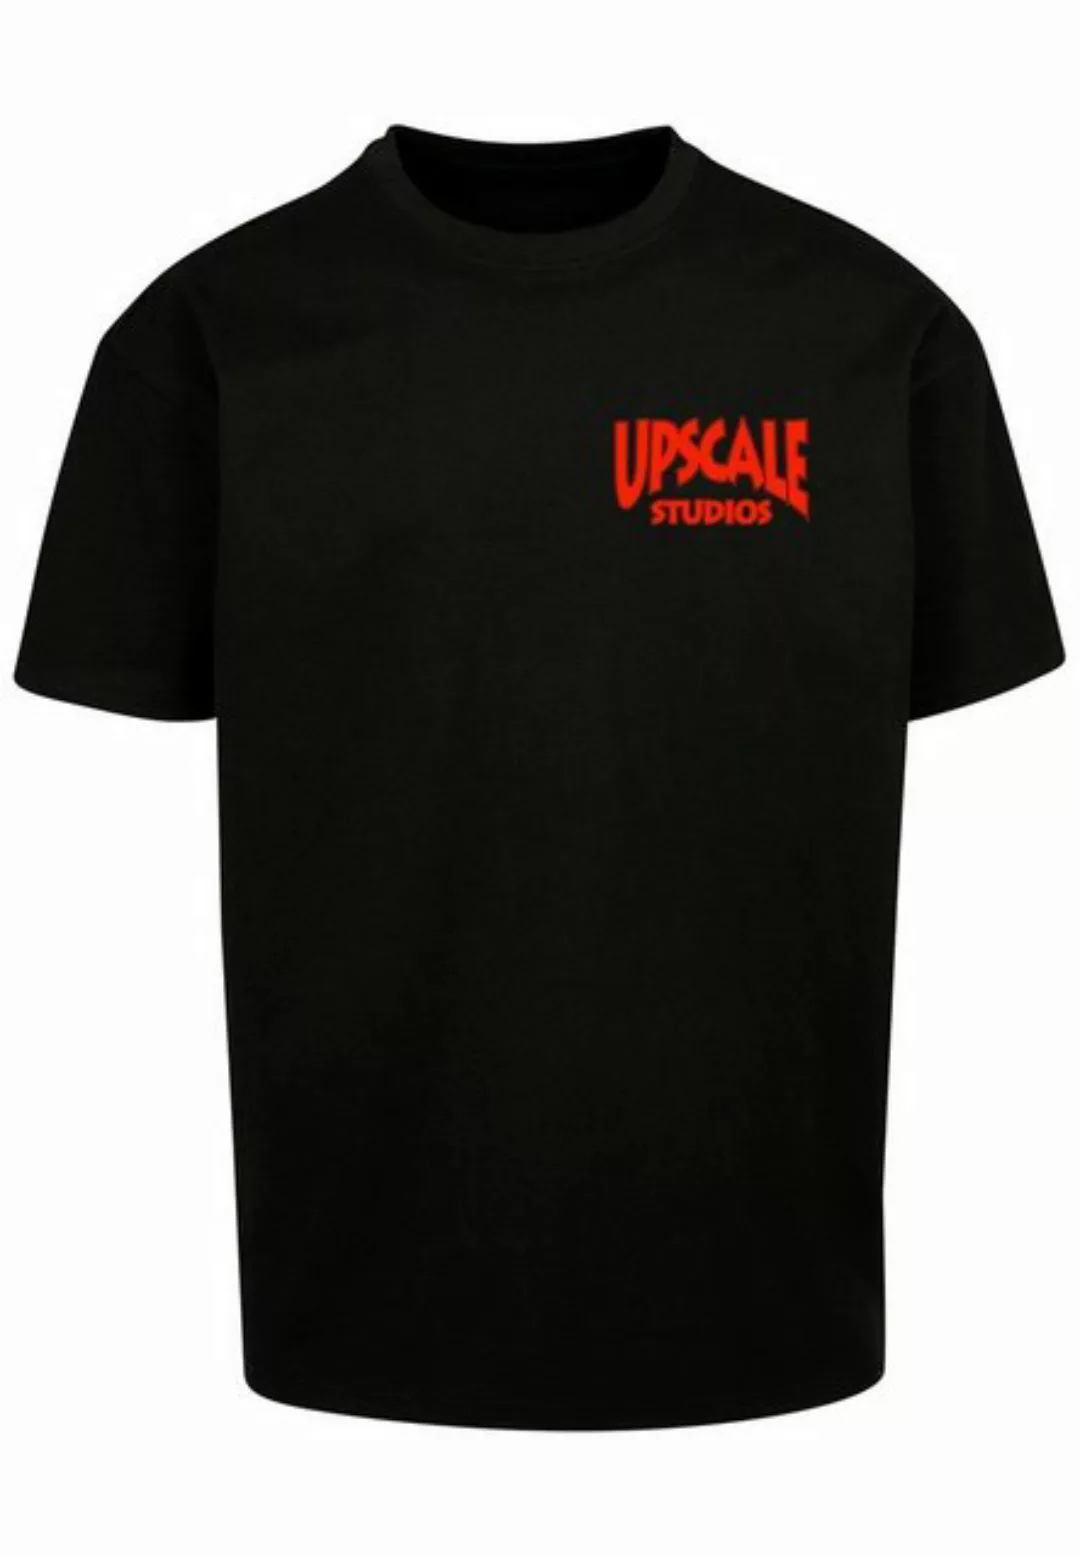 Upscale by Mister Tee T-Shirt Upscale by Mister Tee Unisex Upscale Studios günstig online kaufen